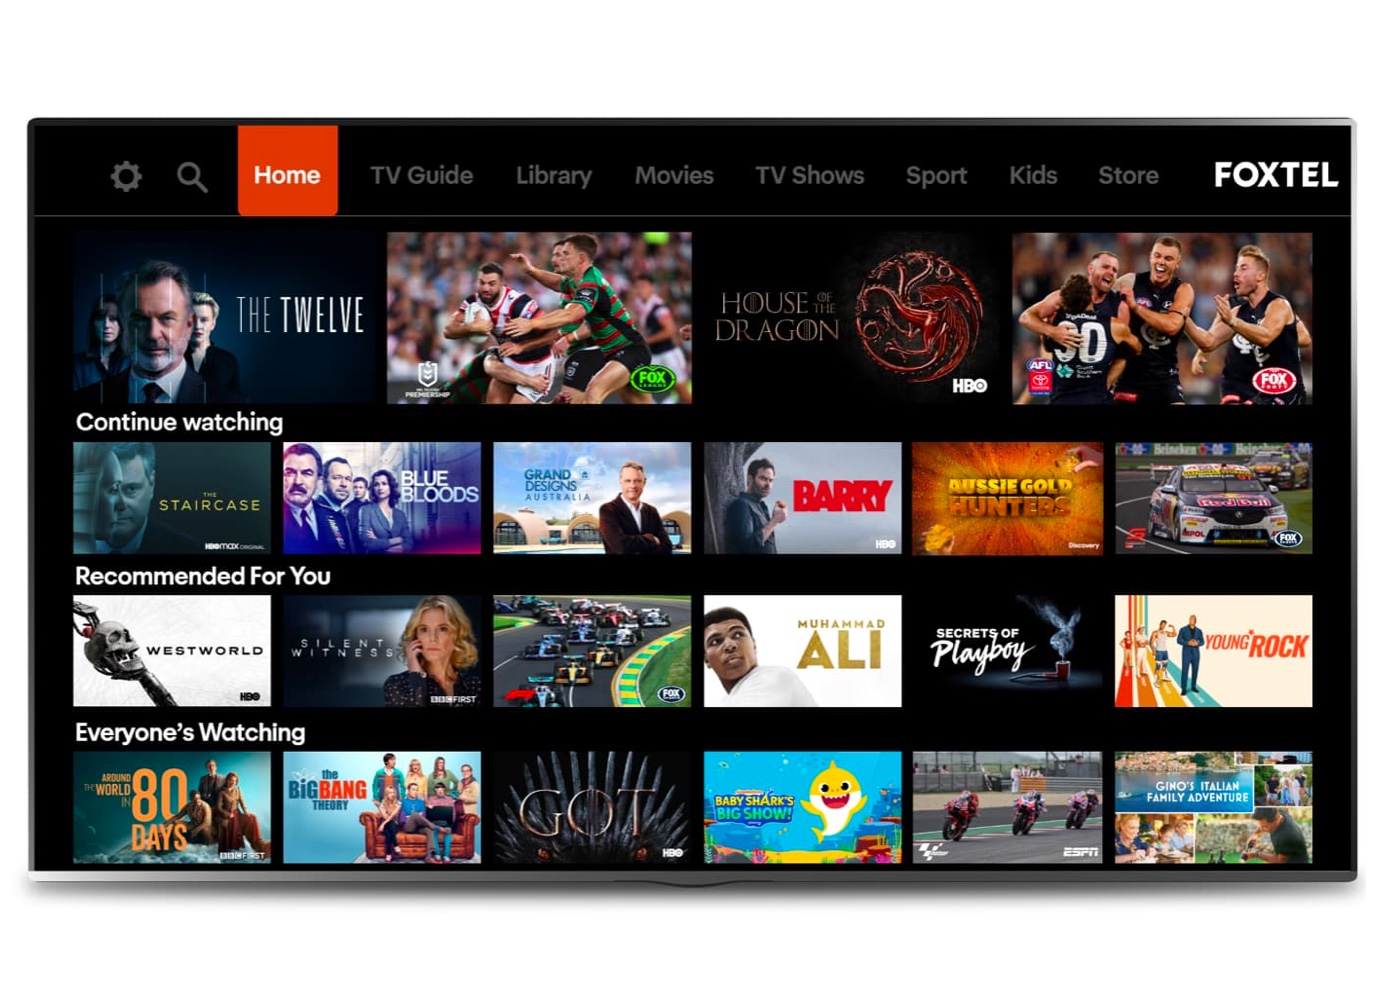 Promotional image of Foxtel from Telstra screen displaying various shows